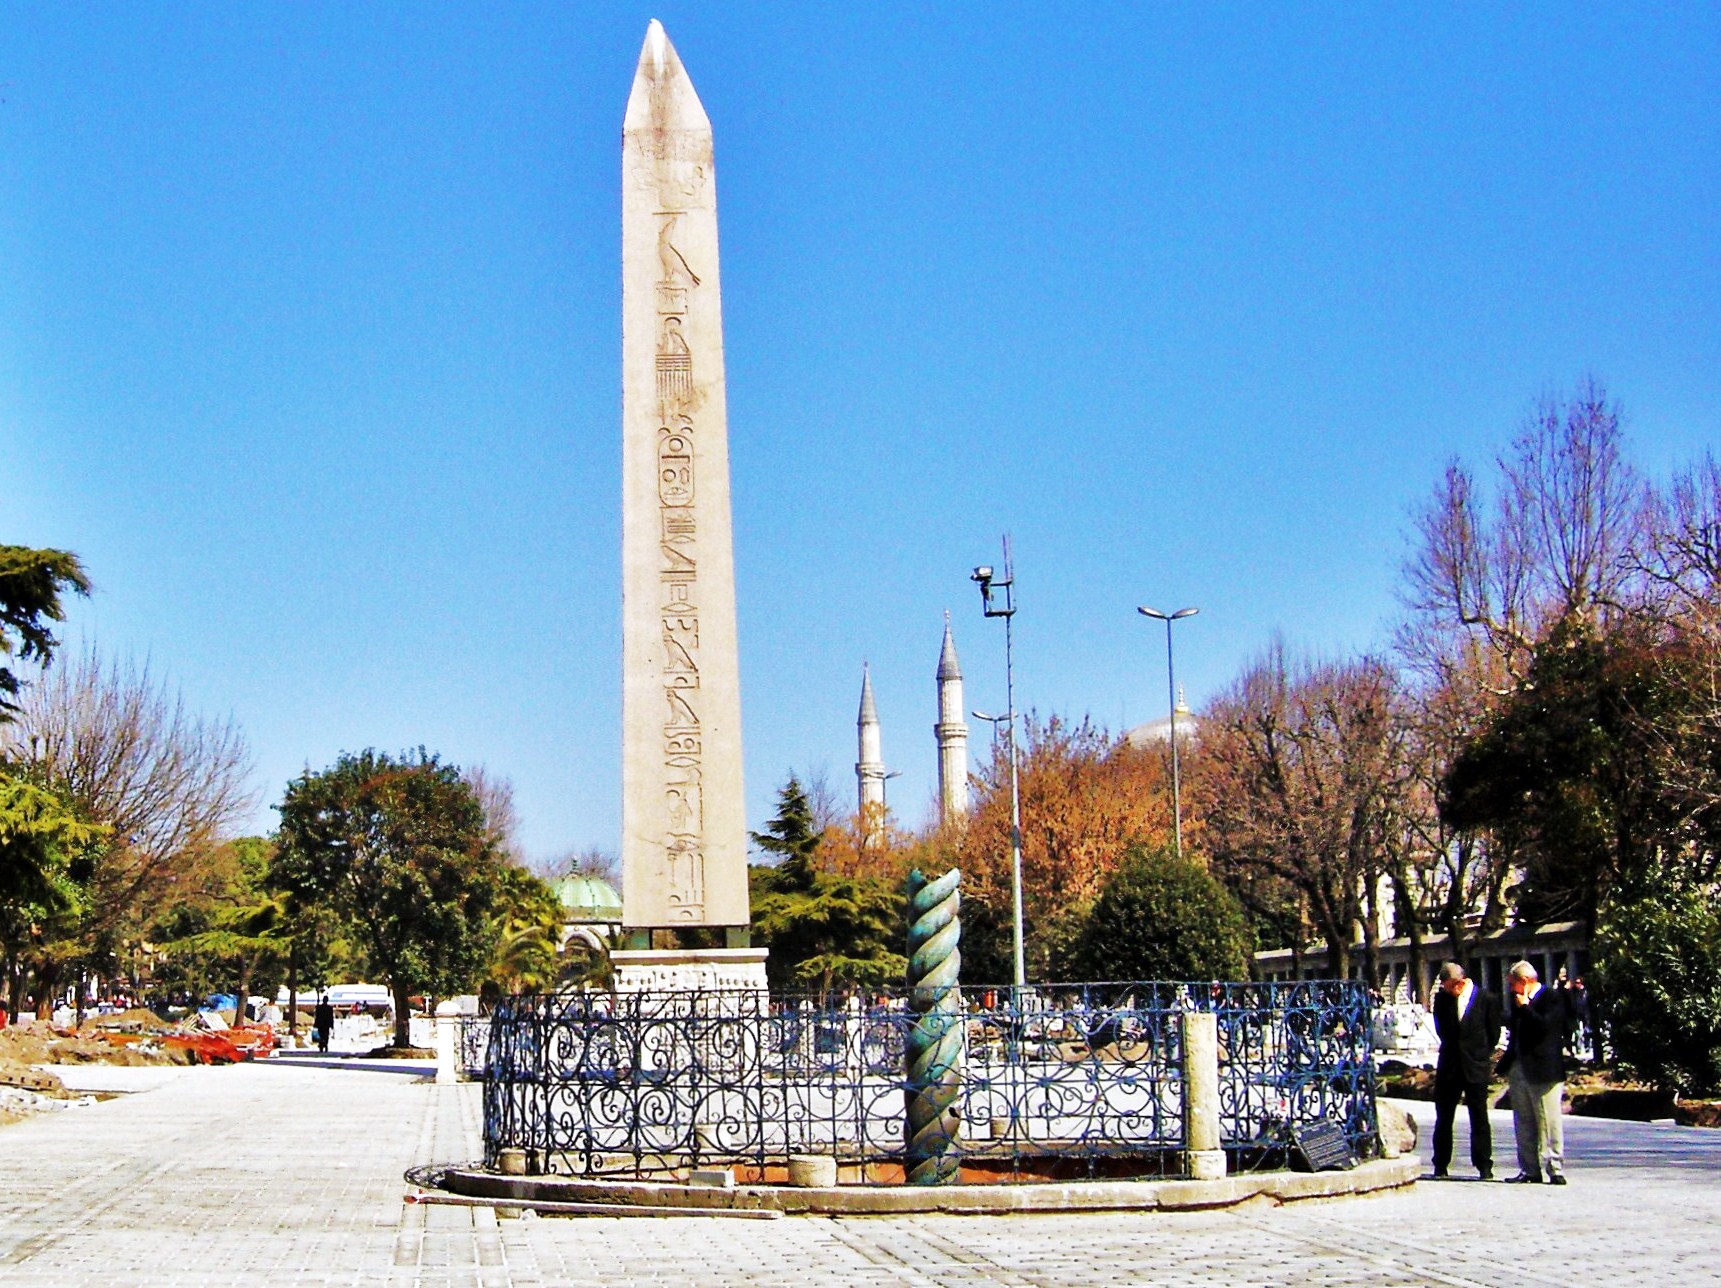 Istanbul Hippodrome, view of The Obelisk with The Serpent Column